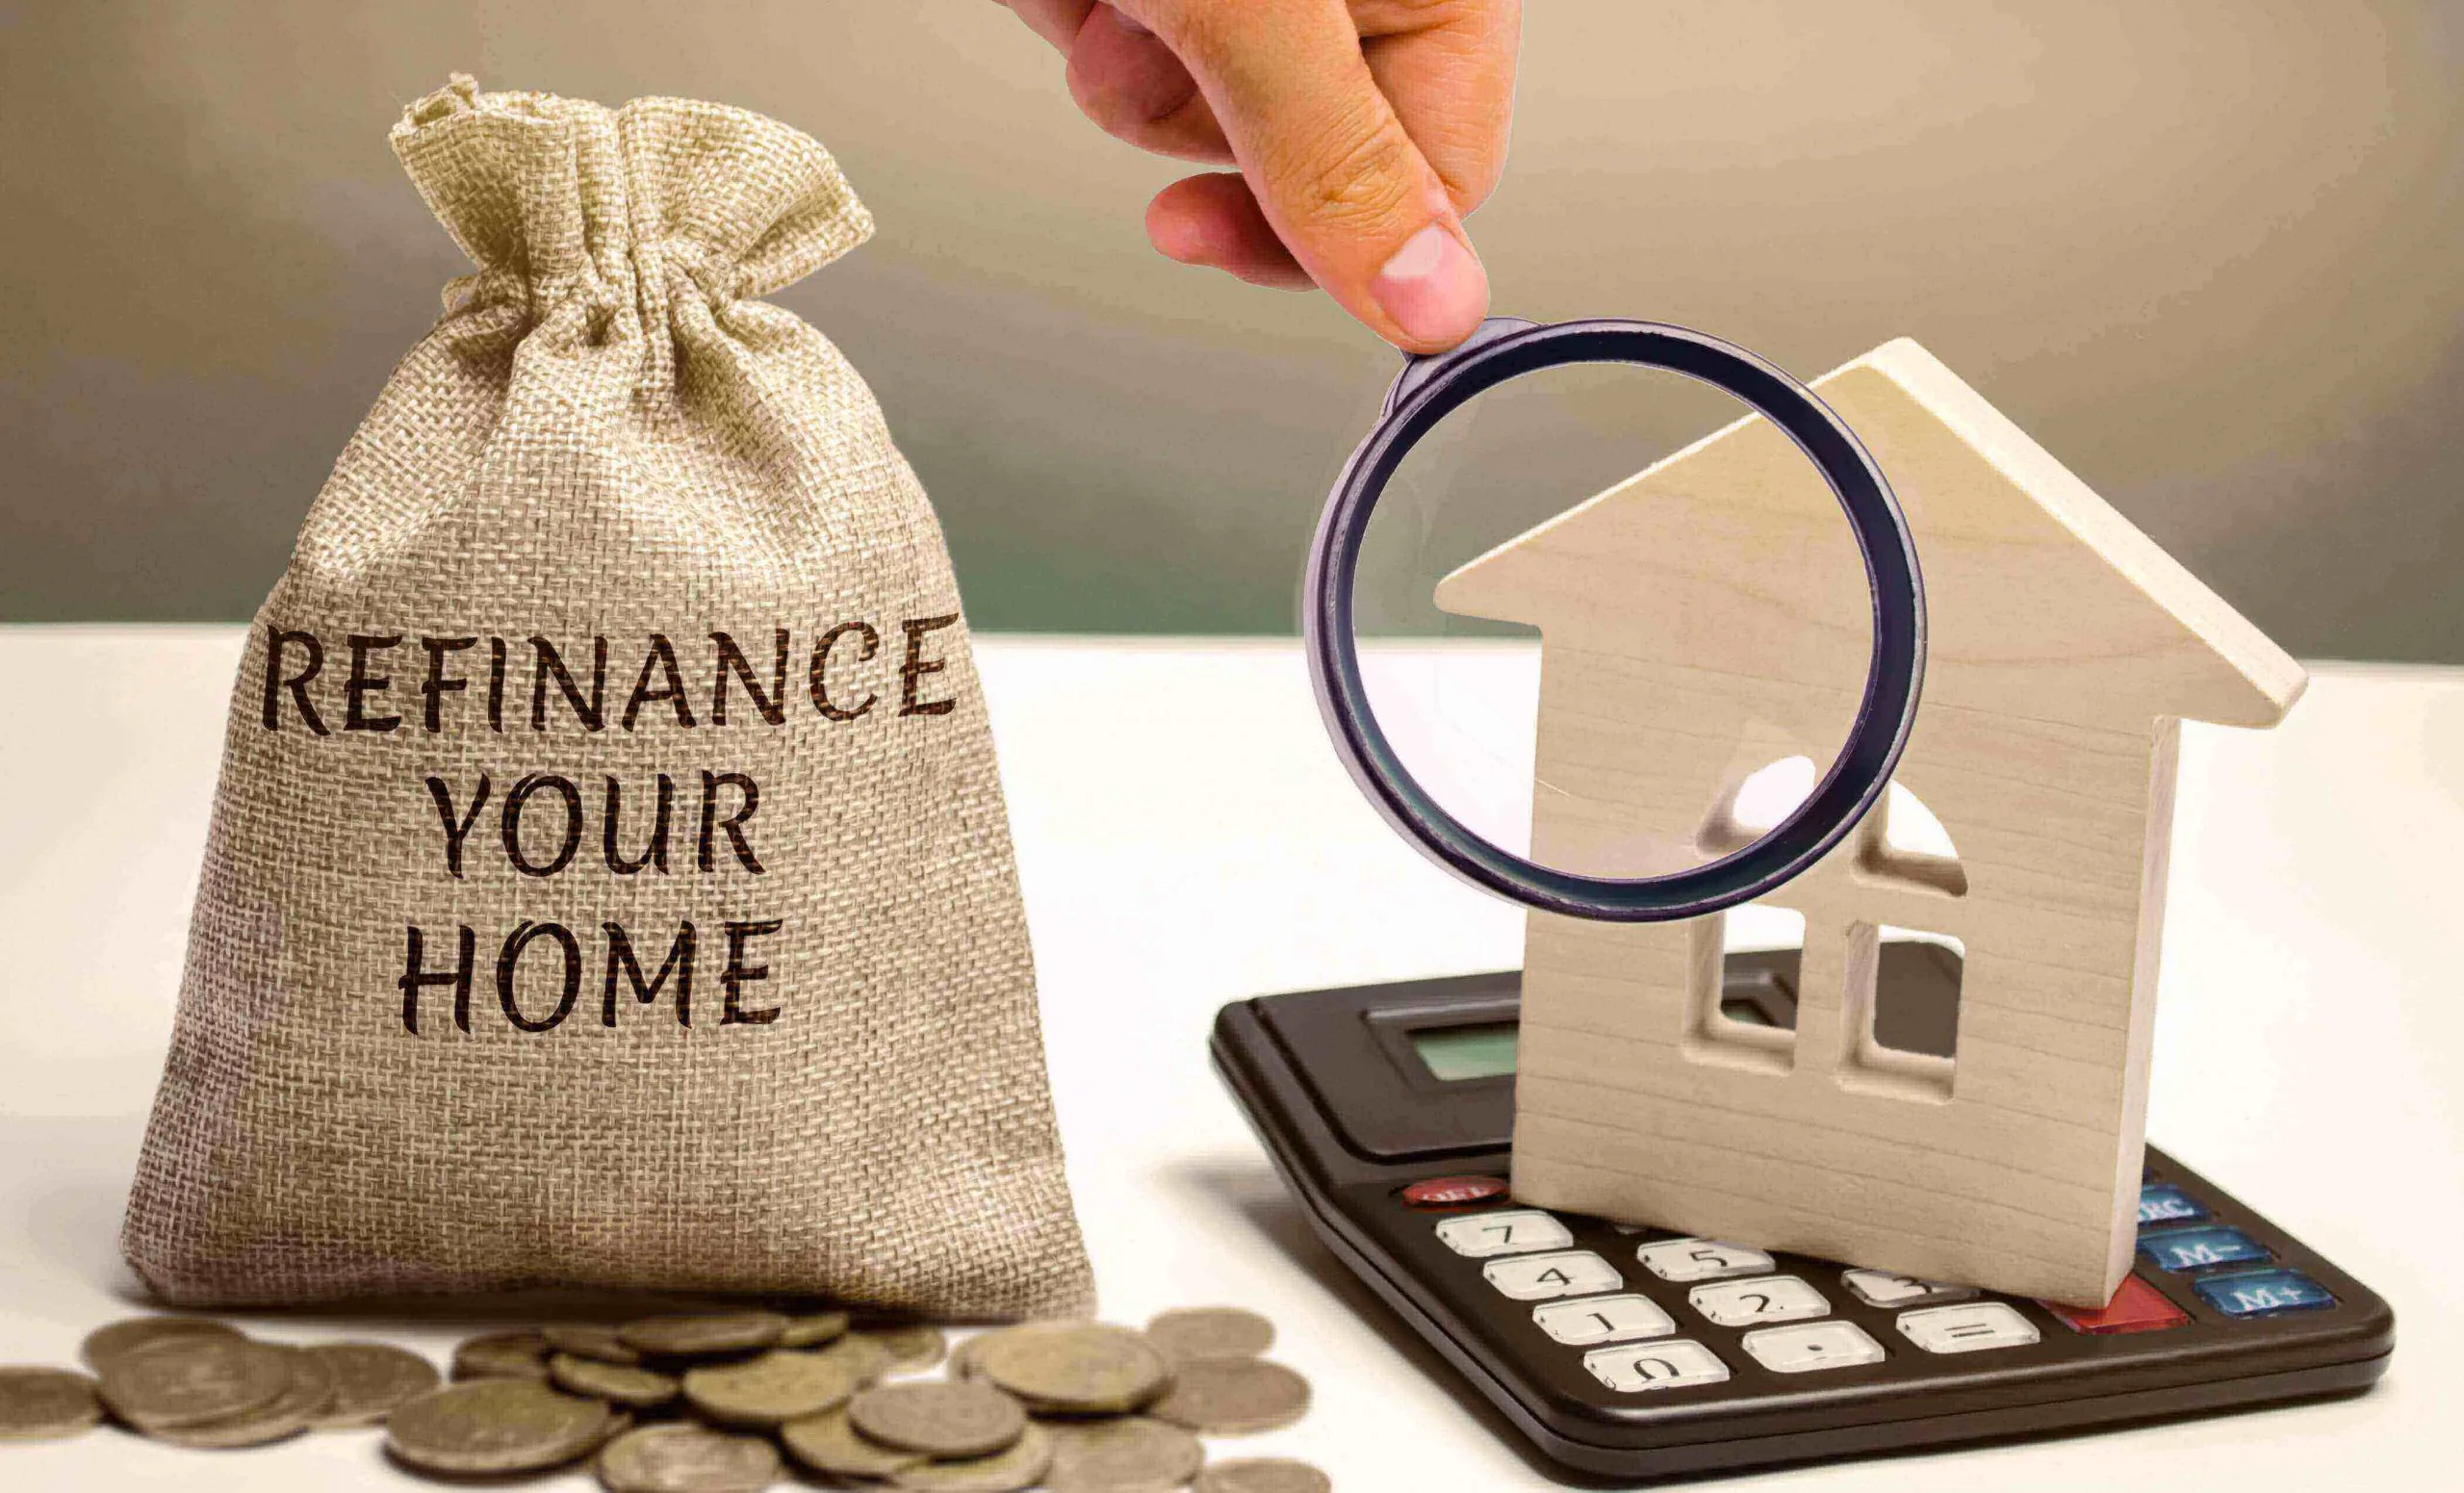 Top 7 Ways to Refinance Real Estate Investment Property in 2020